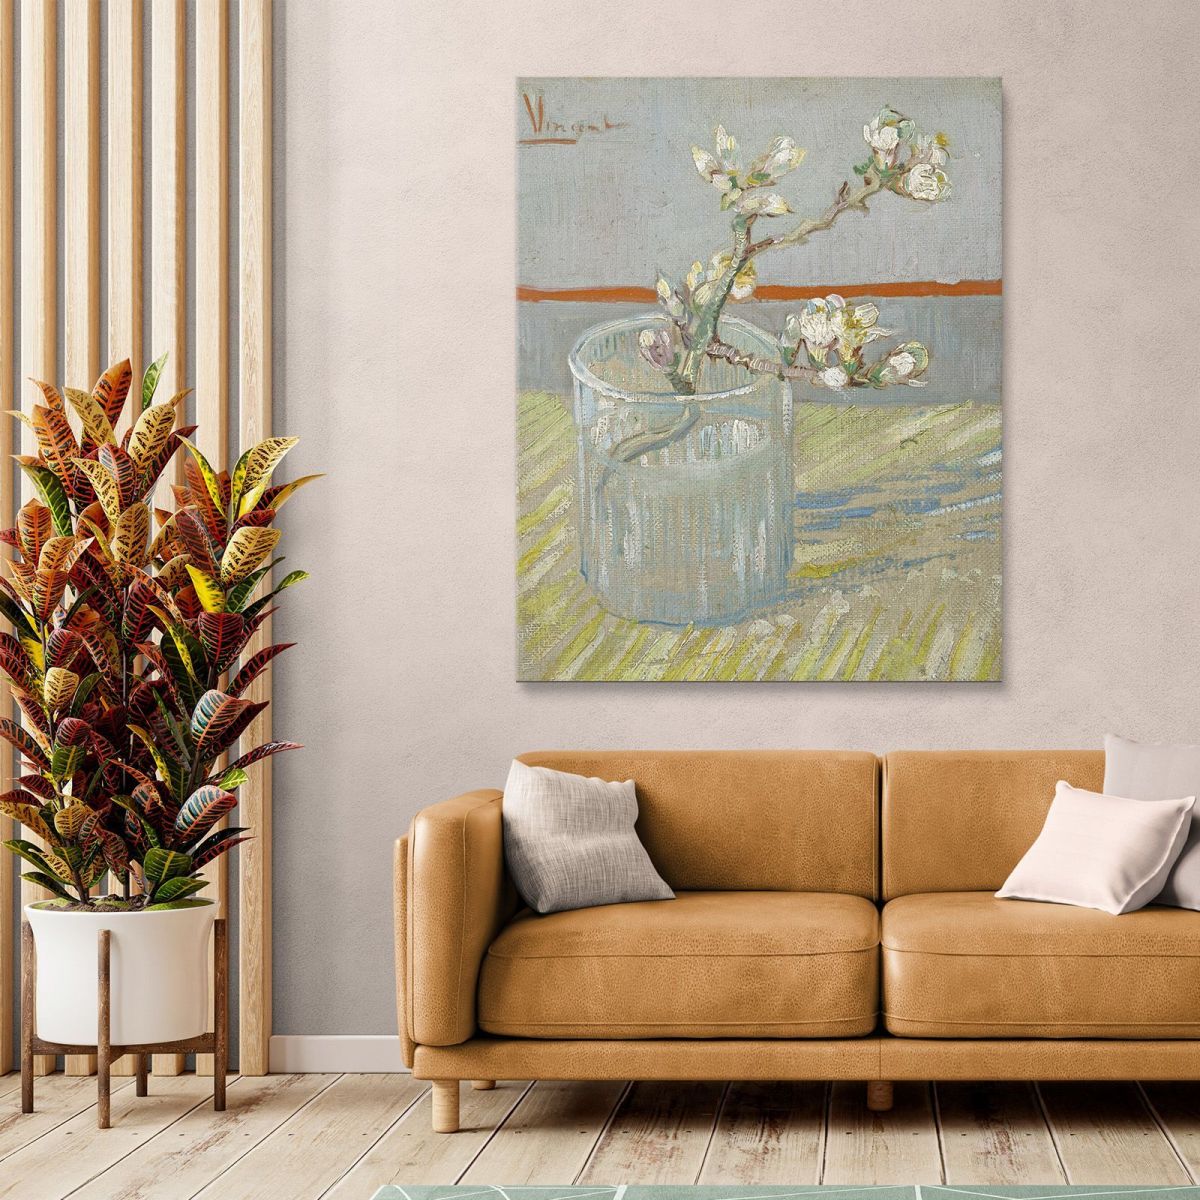 Sprig Of Flowering Almond In A Glass Van Gogh Vincent canvas print vvg163